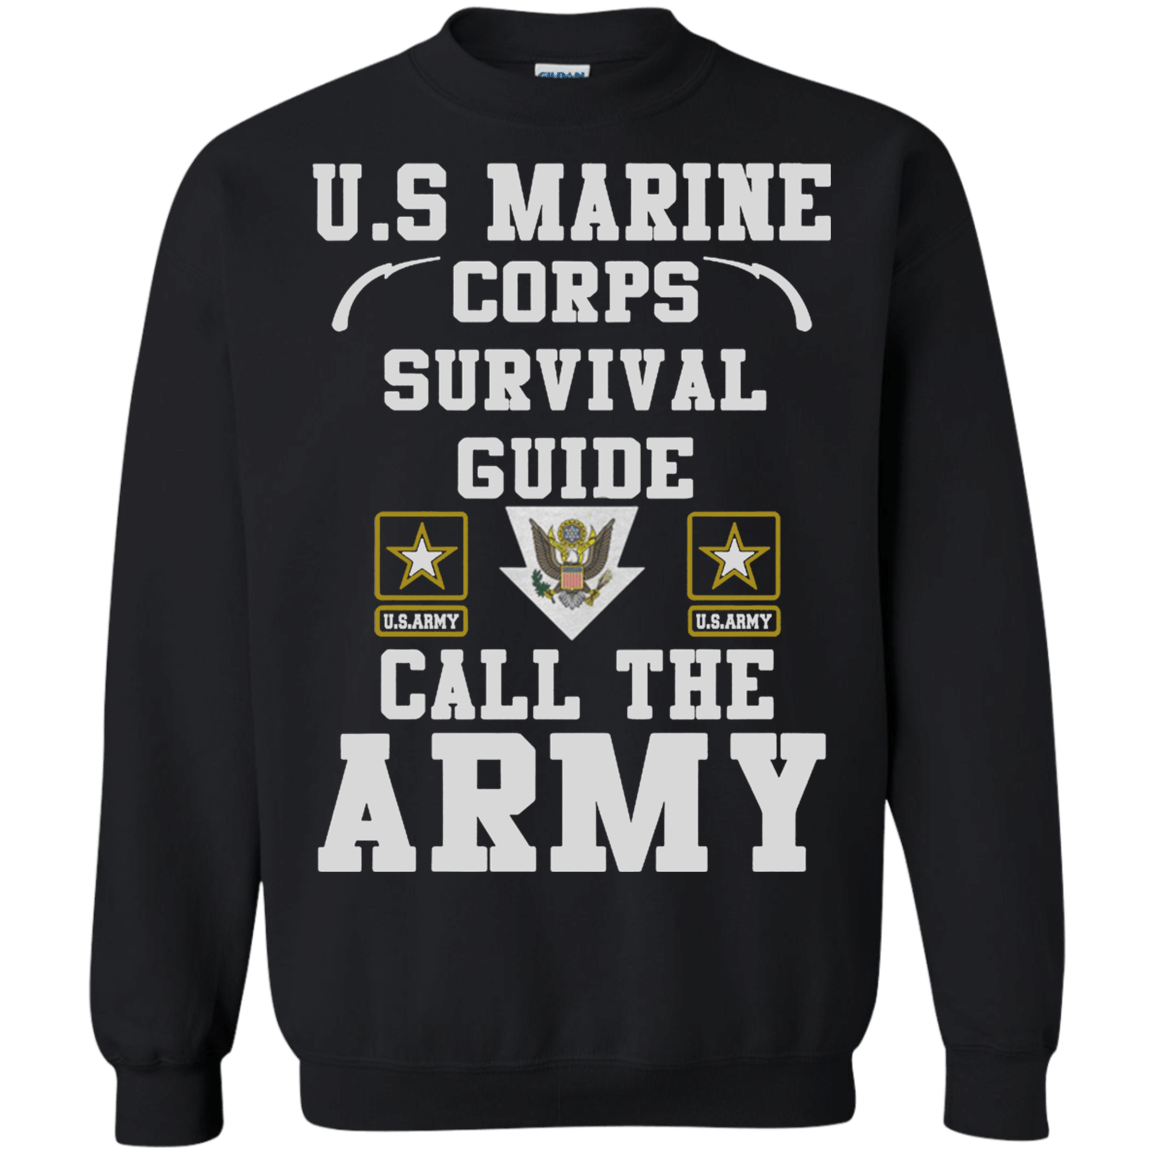 US Marine corps survival guide US Army call the Army shirt Sweatshirt